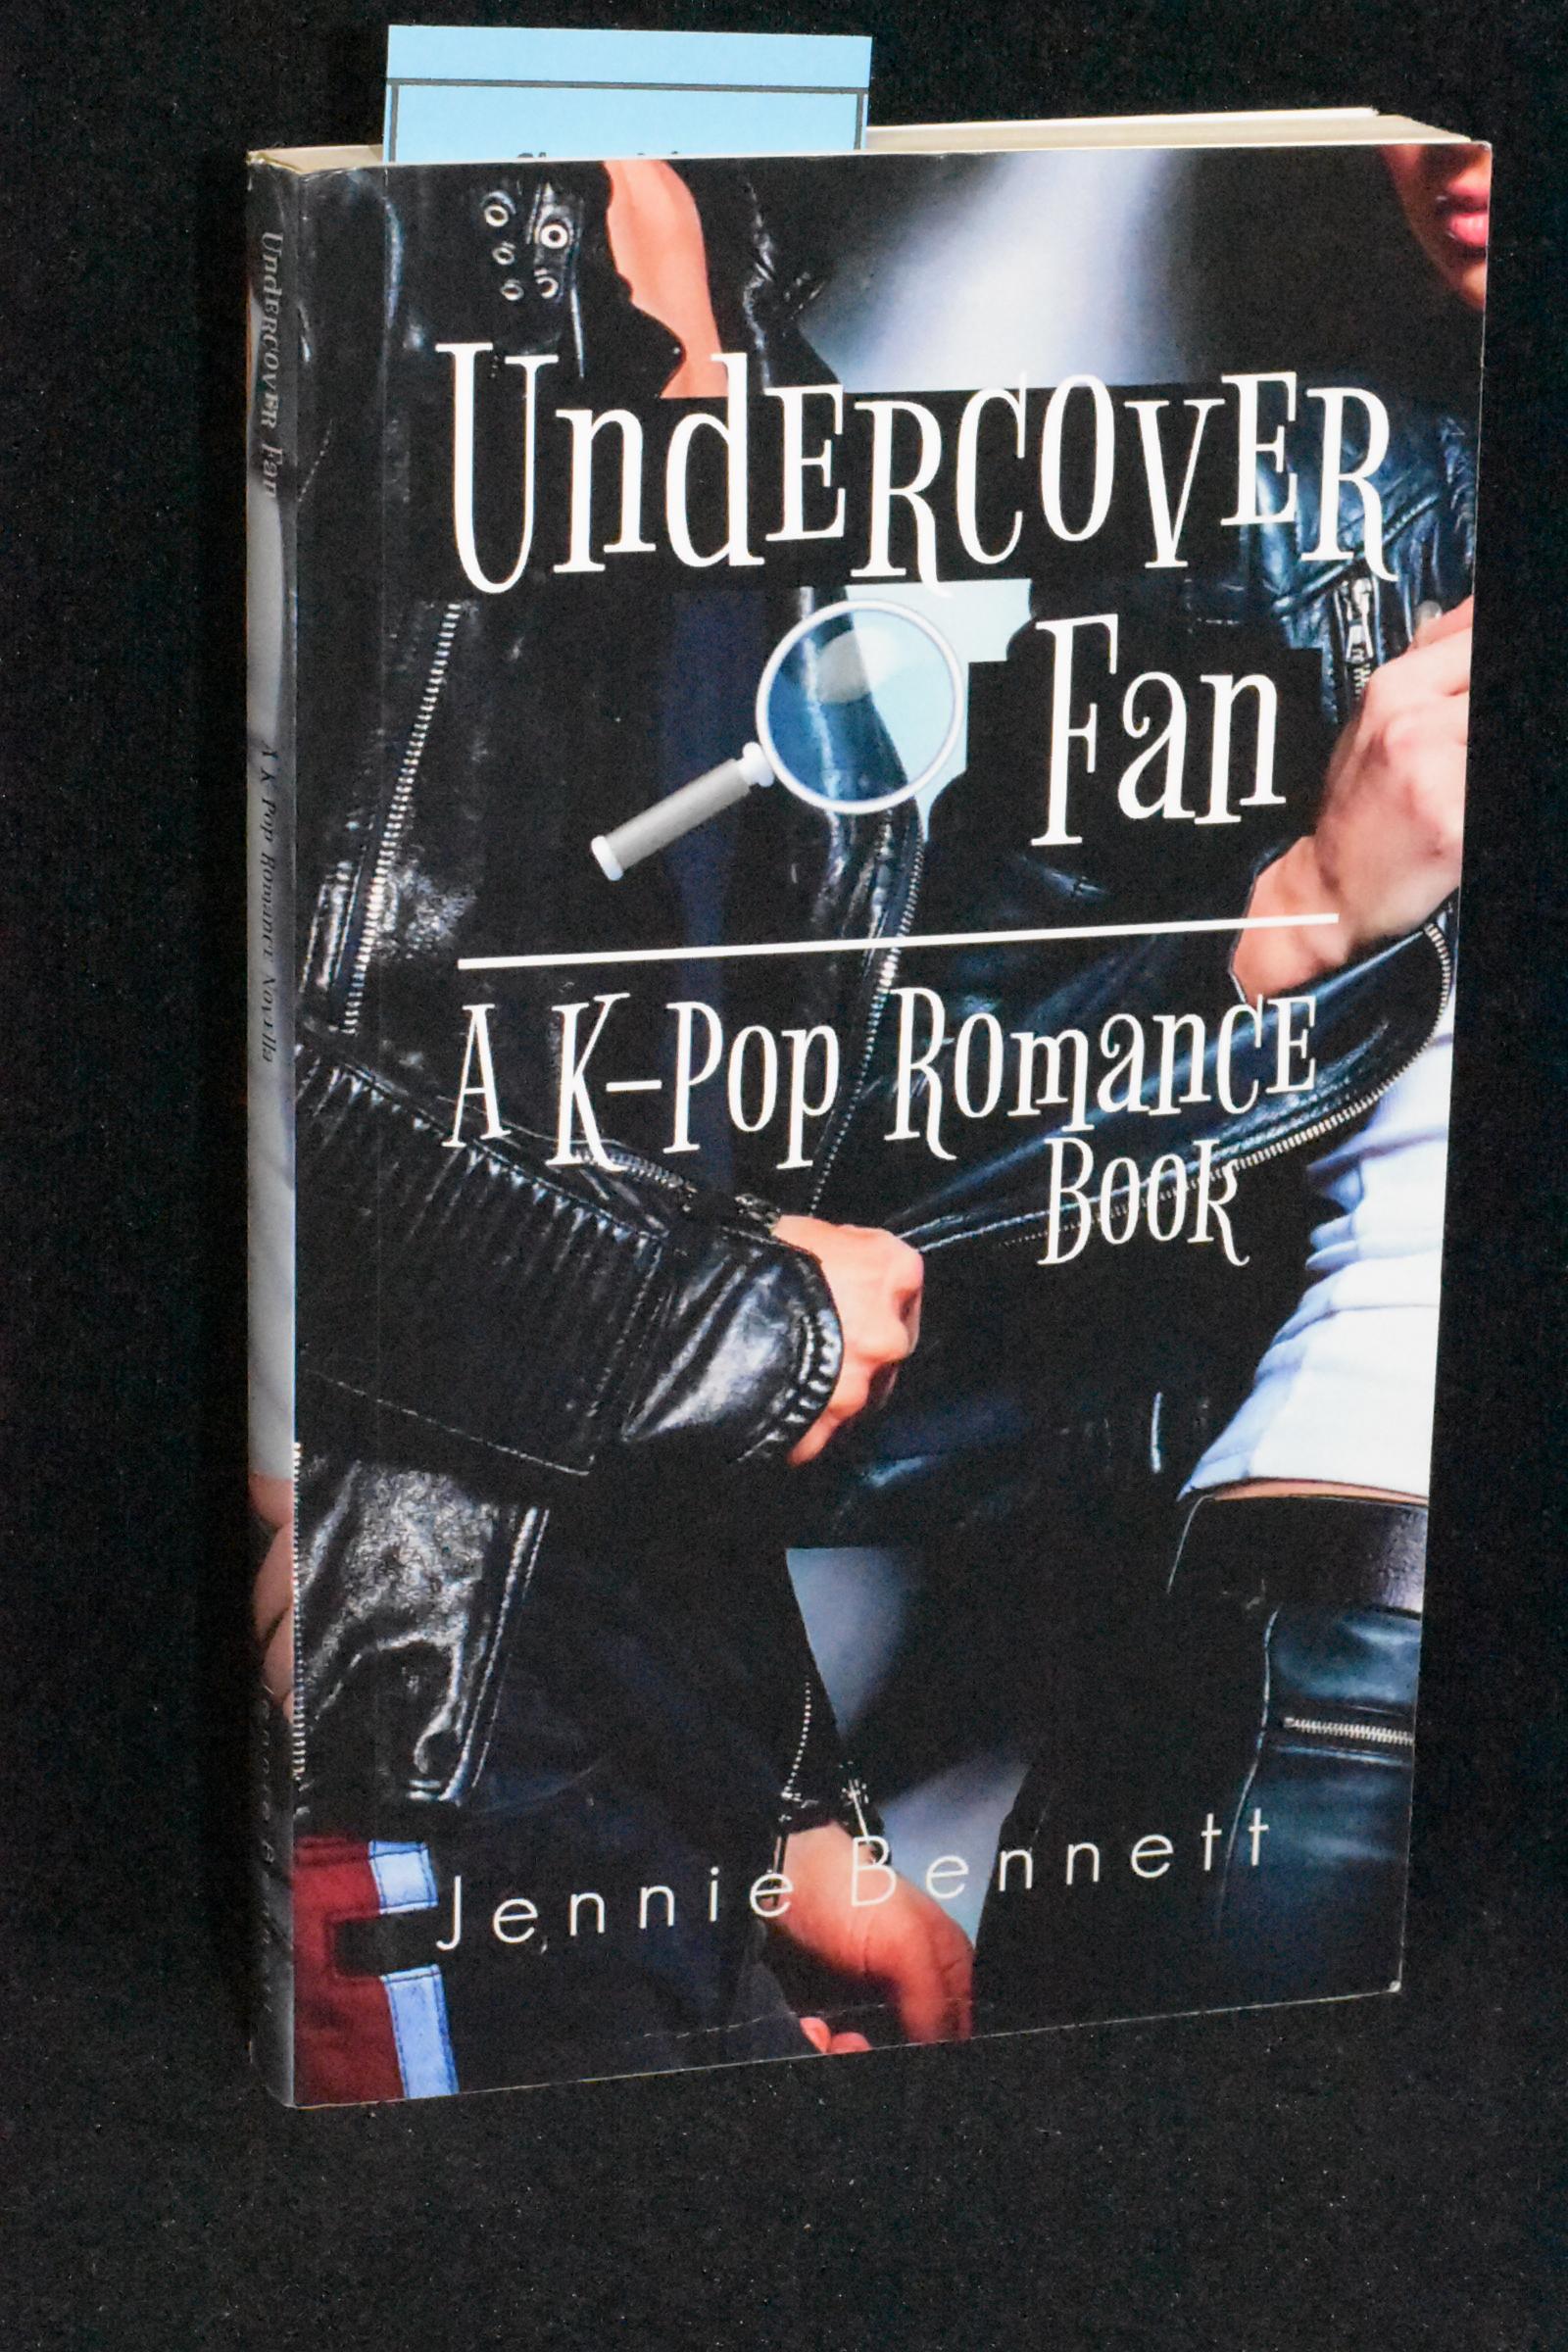 Undercover Fan; A K-Pop Romance Book by Jennie Bennett (AUTHOR SIGNED): Very Soft (2017) 1st Edition, Inscribed by Author(s) | Books by White/Walnut Valley Books